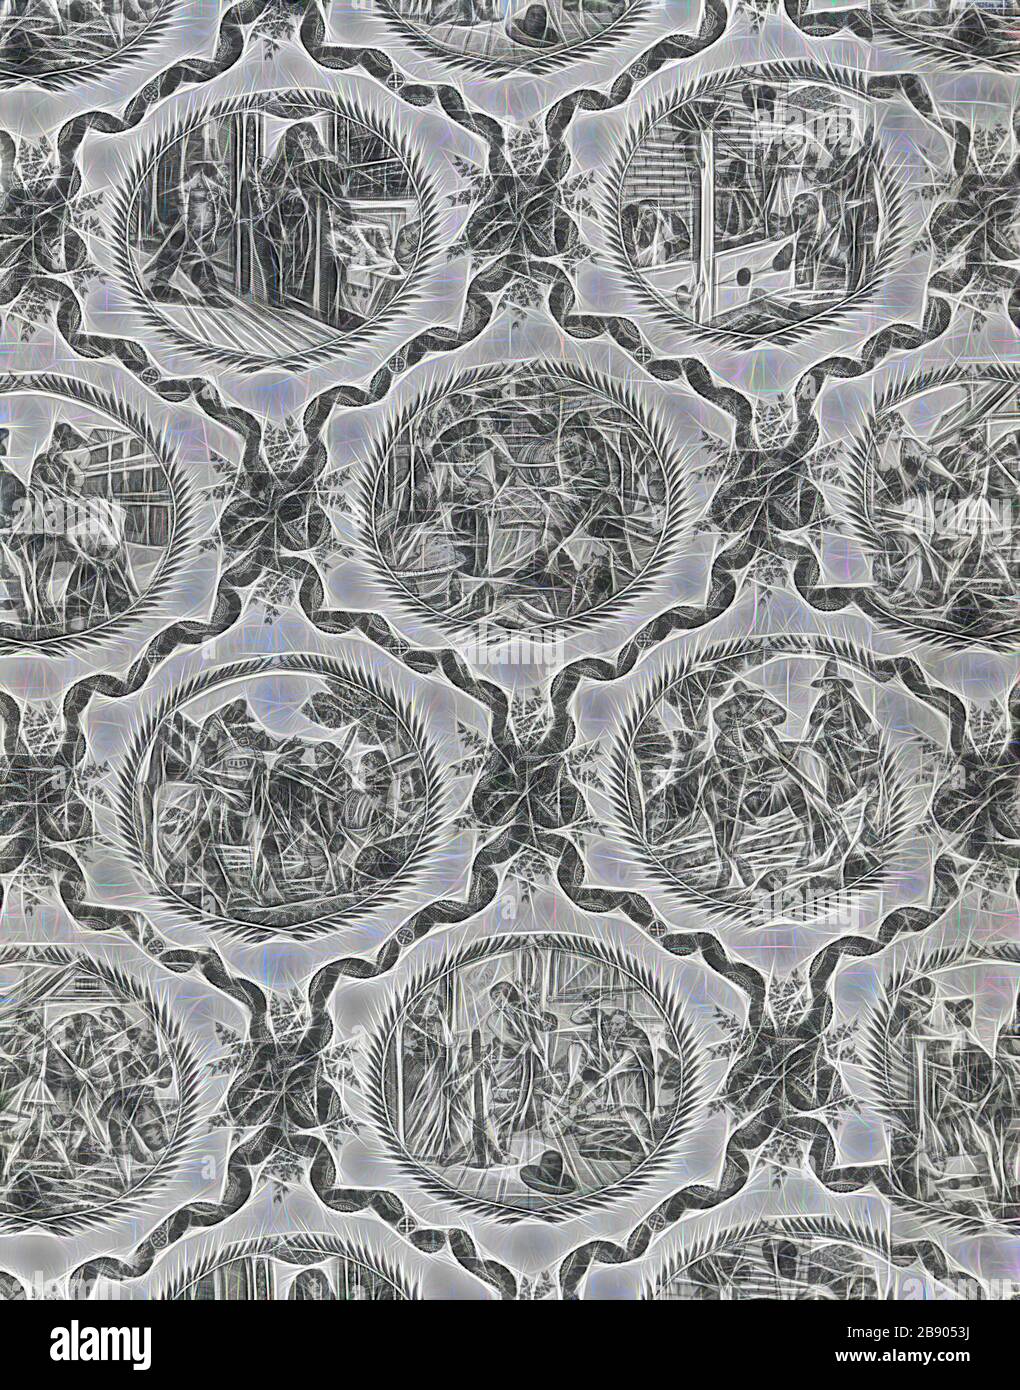 Bedcover, 1780s, Engraved by William Hogarth (English, 1697–1764)  after illustrations by Samuel Butler (English, 1612–1680), England, Cotton, plain weave, copperplate printed, edged and backed with cotton, plain weave, quilted, two and a half panels joined, 251.3 × 172.8 cm (98 7/8 × 68 in.), Reimagined by Gibon, design of warm cheerful glowing of brightness and light rays radiance. Classic art reinvented with a modern twist. Photography inspired by futurism, embracing dynamic energy of modern technology, movement, speed and revolutionize culture. Stock Photo